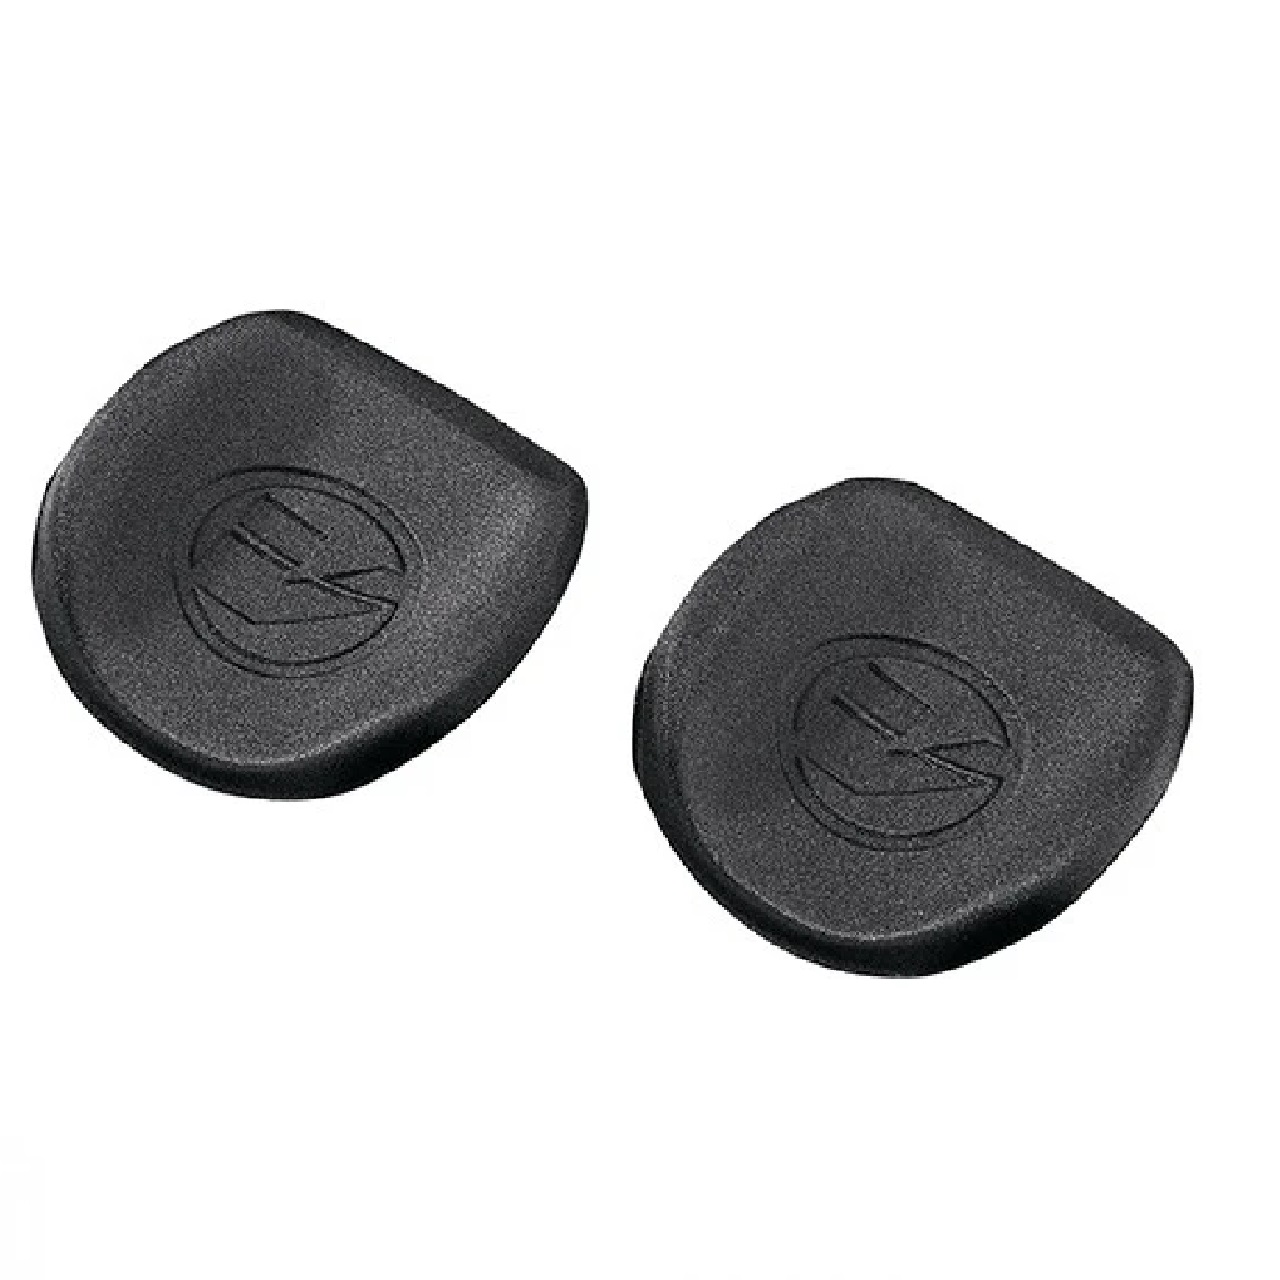 Vision Replacement R25 Armrest Pads for AeroBars